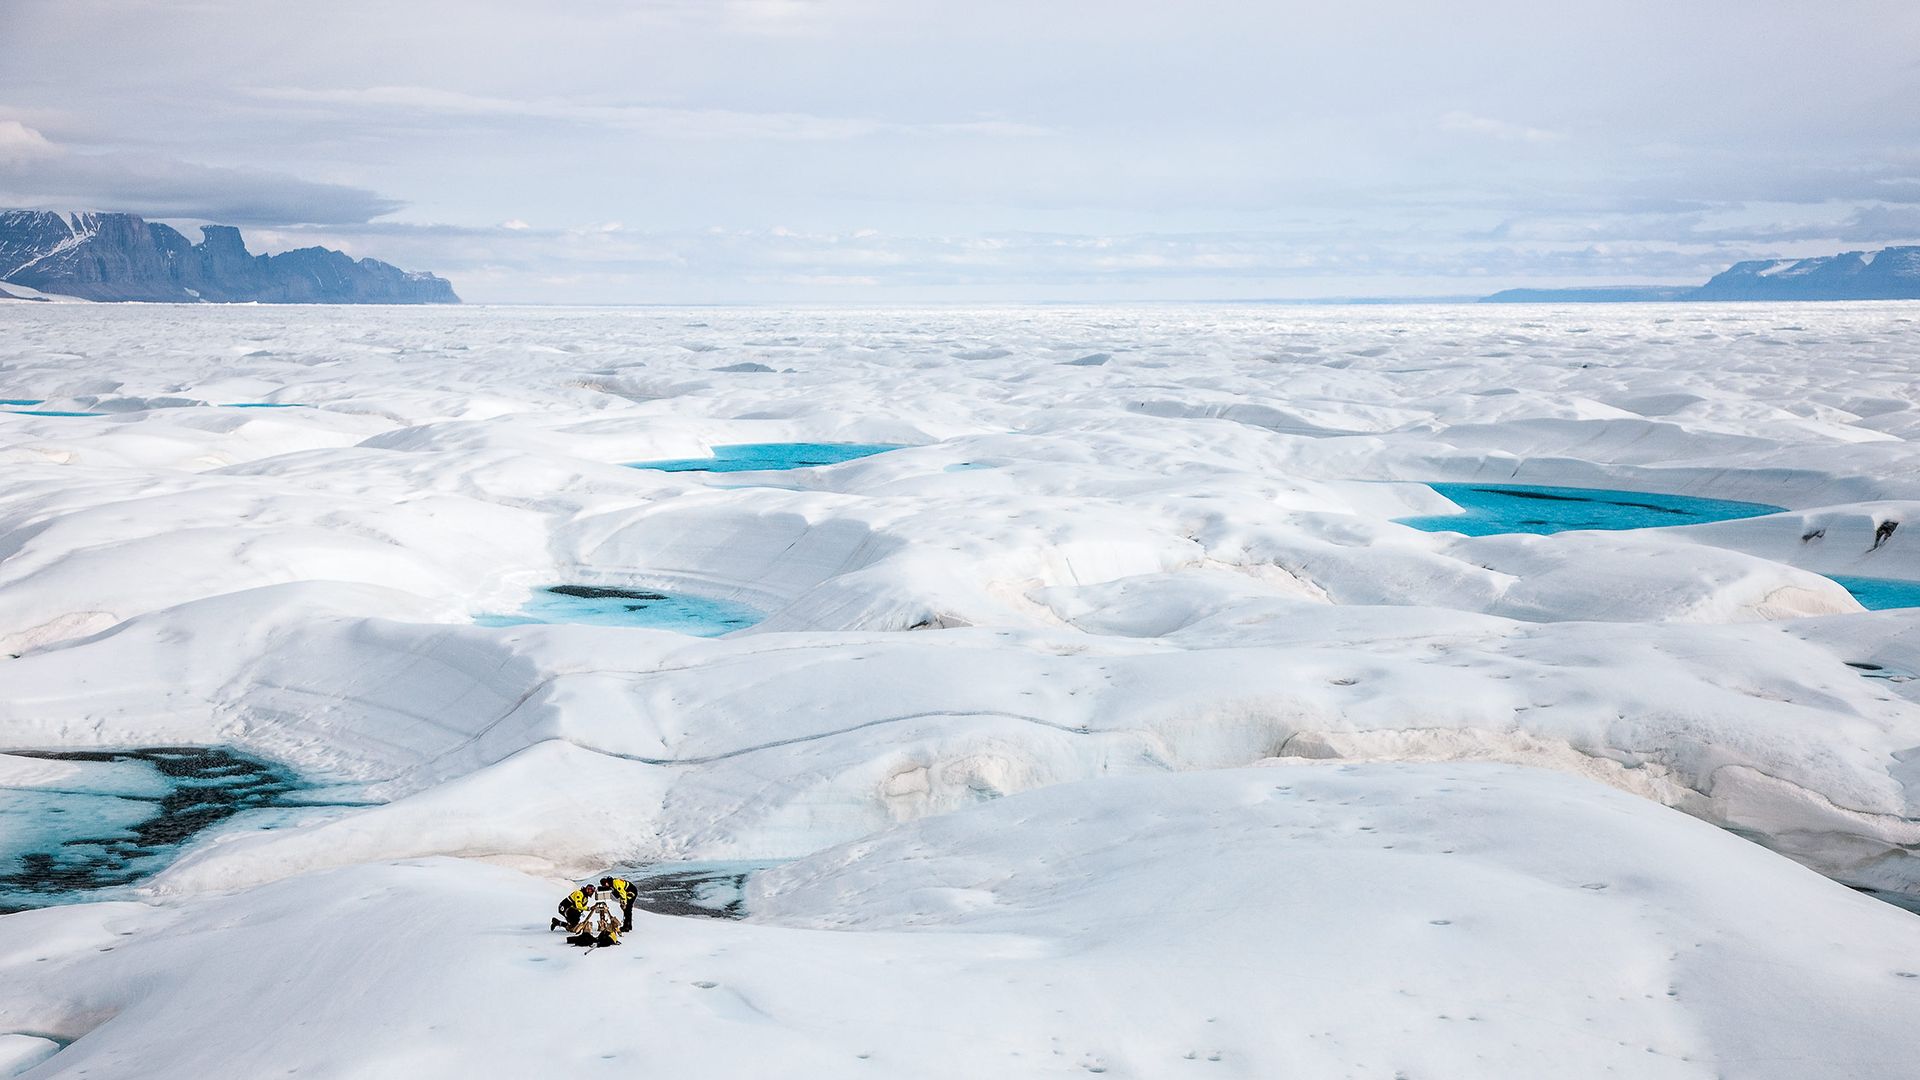 glaciologist jason box, left, at work on the petermann glacier on greenland's northwest coast, which has lost mass at an accelerated pace in recent years box and his family left ohio state for europe a couple years ago, and he is relieved to have escaped america's culture of climate change denial